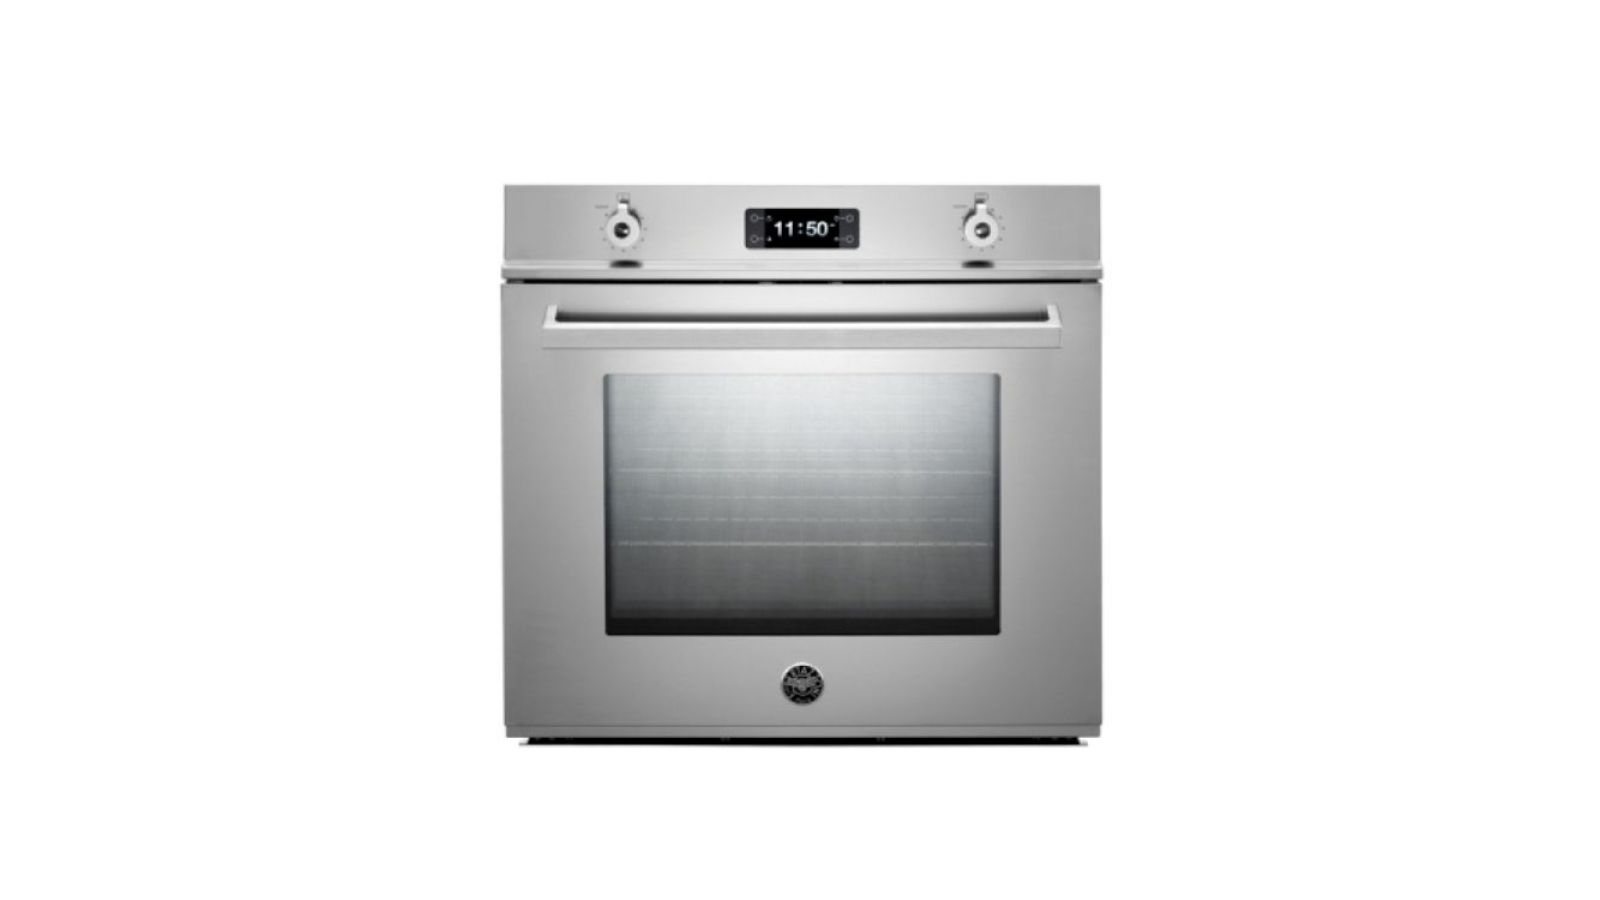 Professional Series 30 inch Single Oven F30 PRO XT and XE